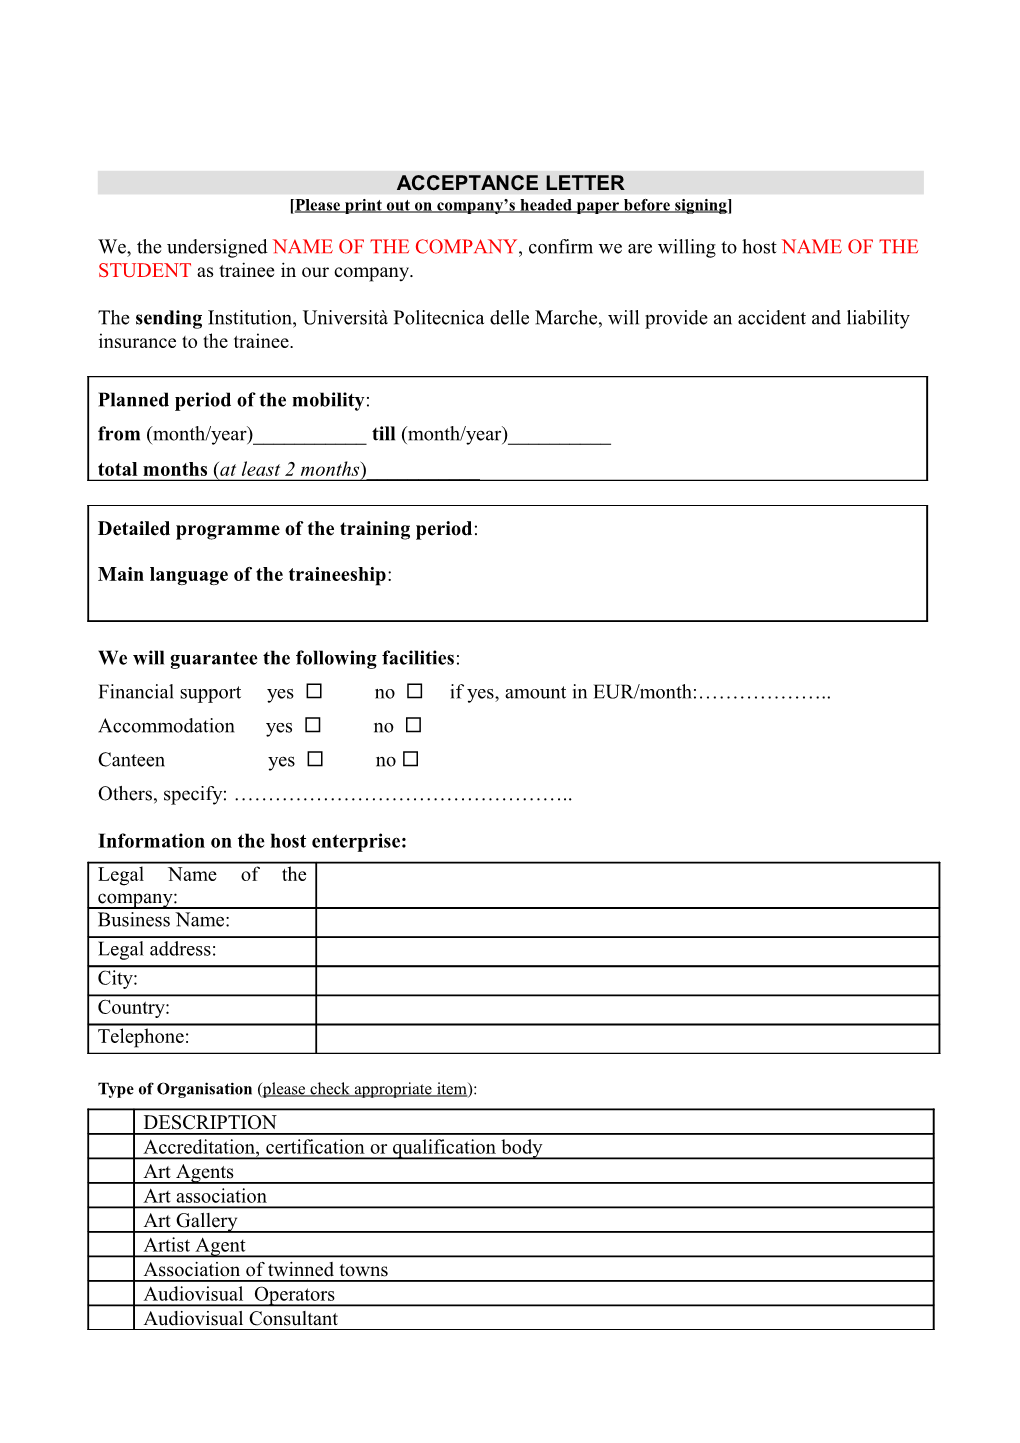 Please Print out on Company S Headed Paper Before Signing